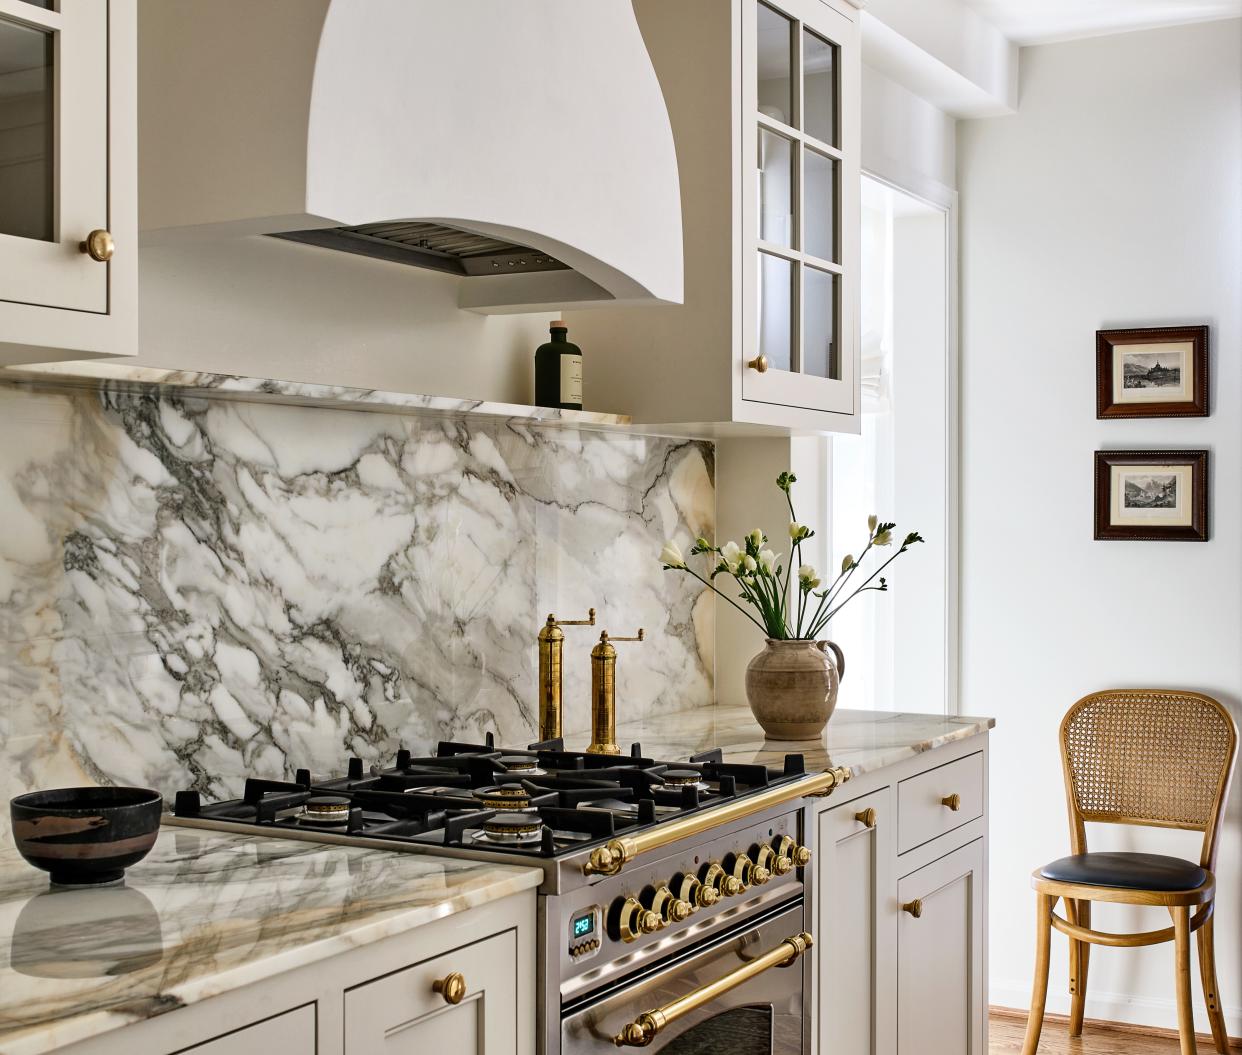  A kitchen with a veined backsplash, antique knobs and a white palette. 